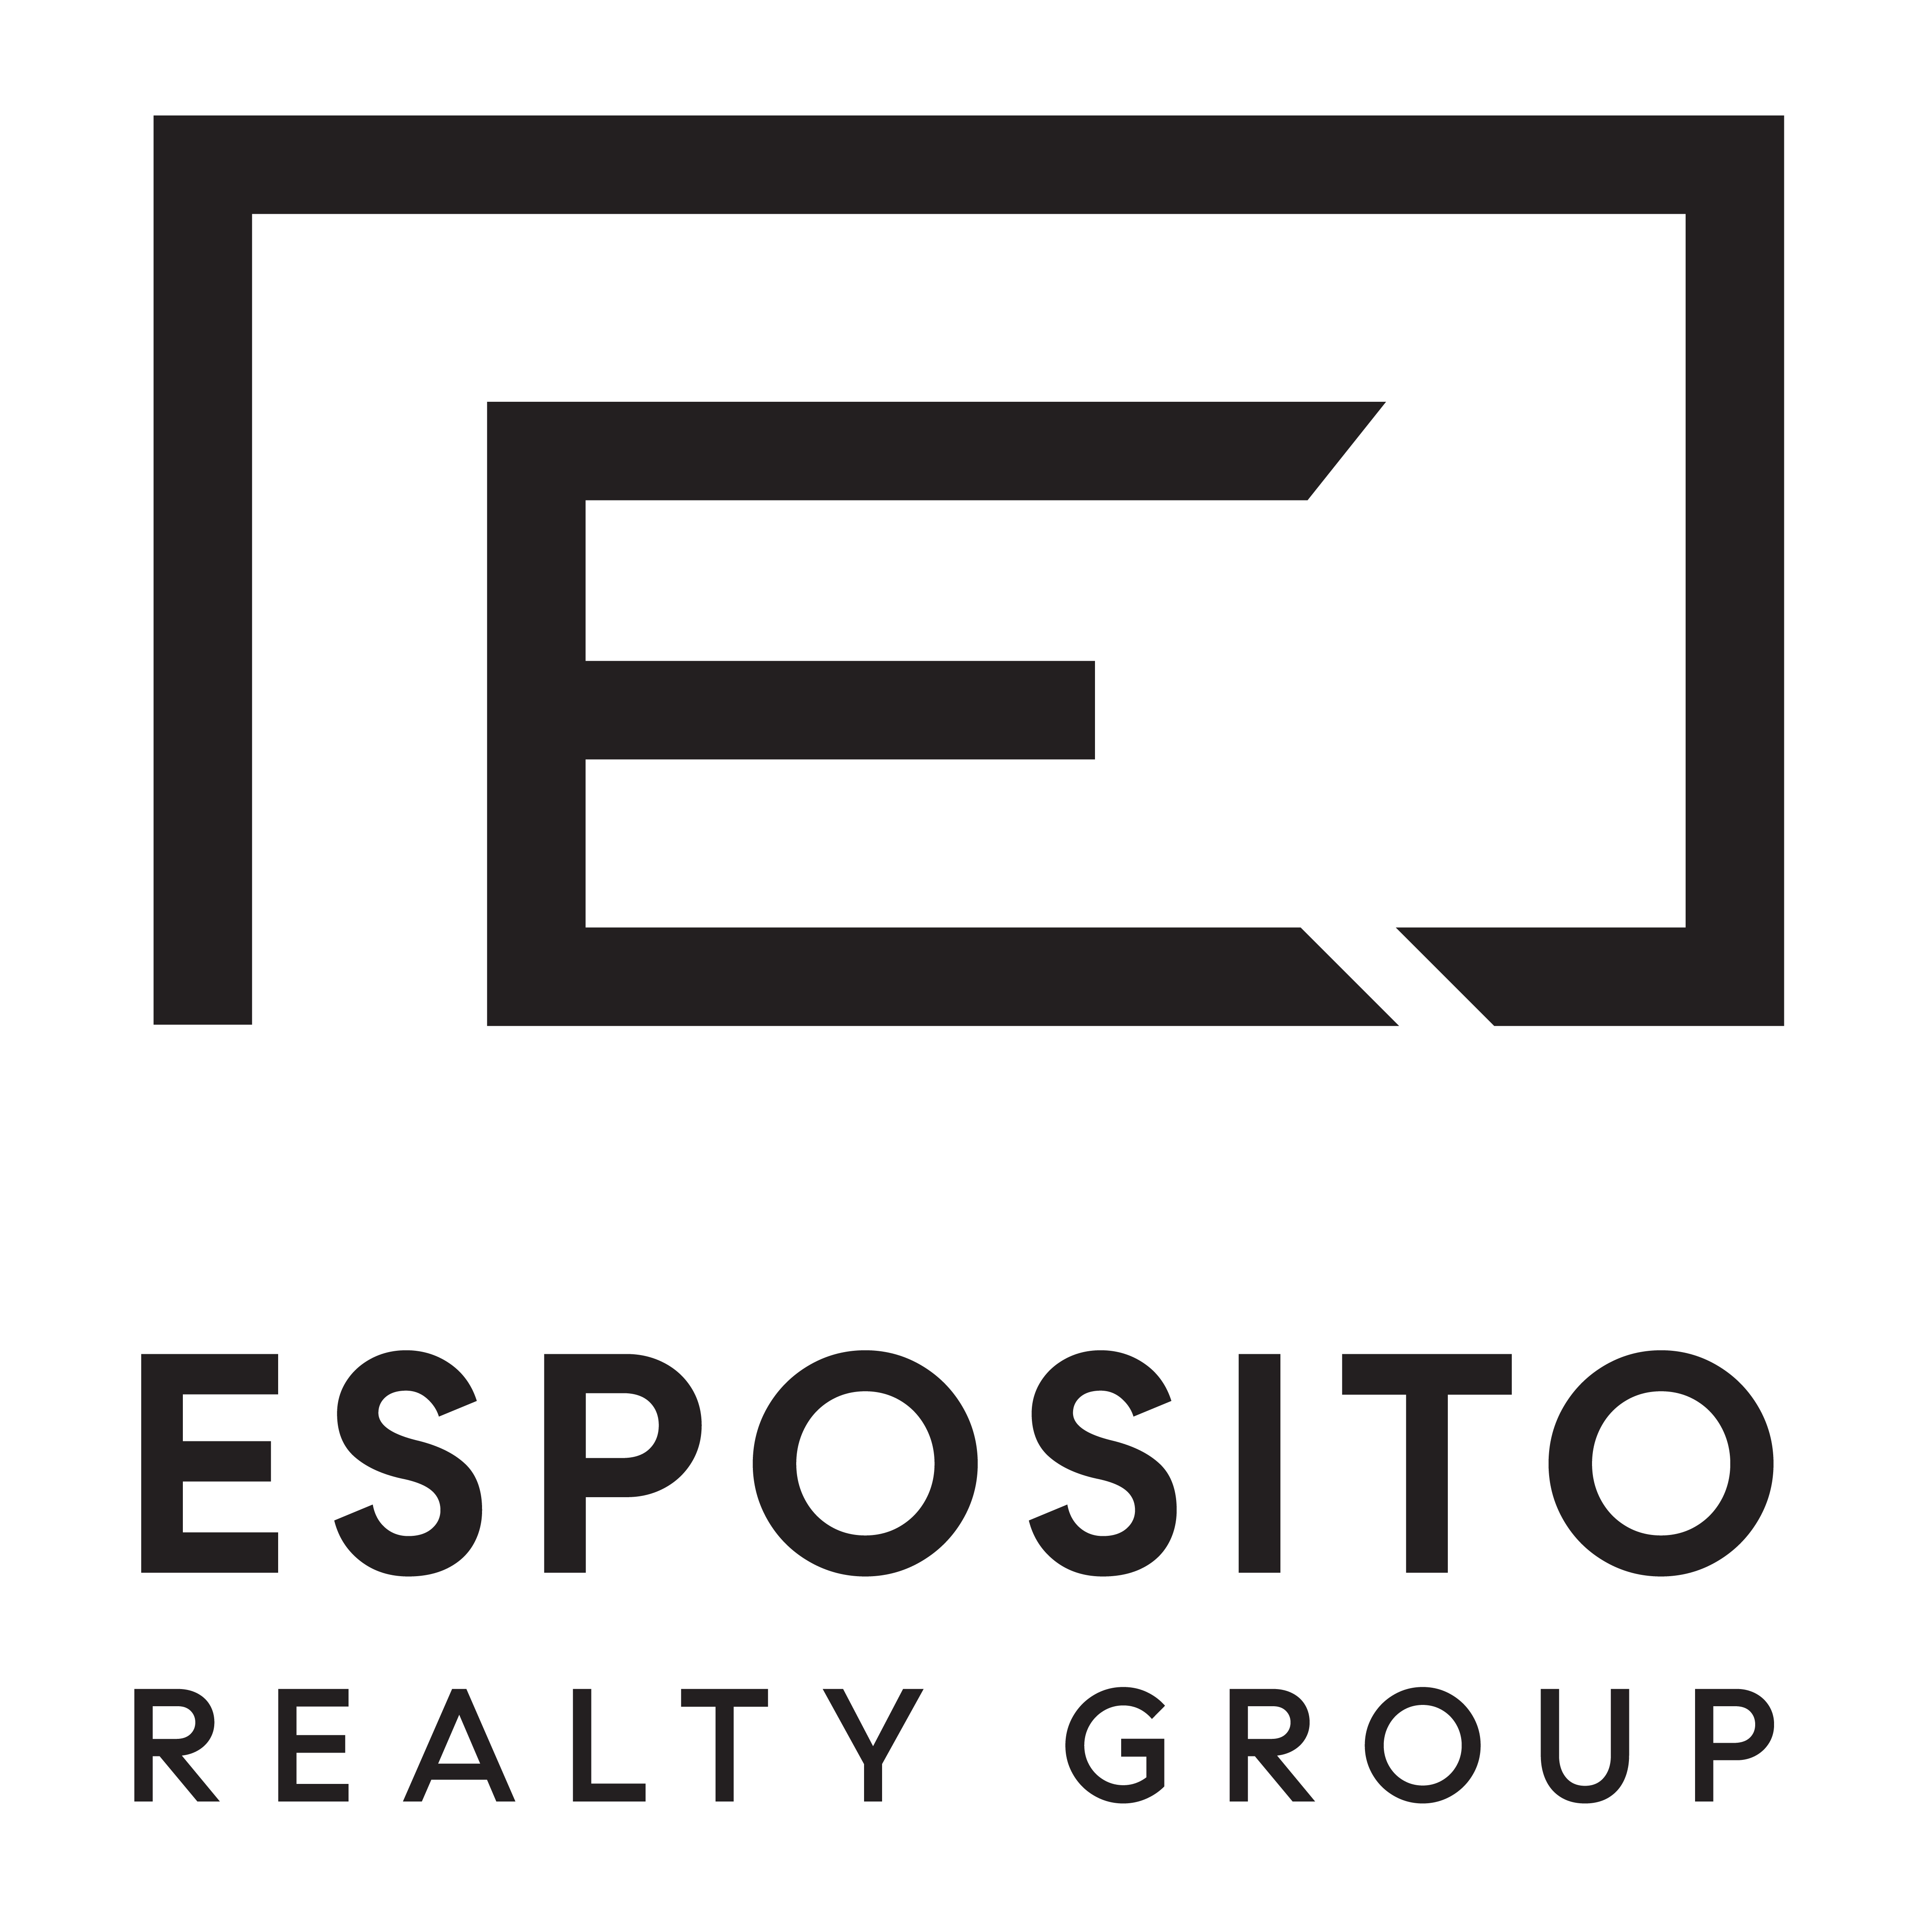 Esposito Realty Group